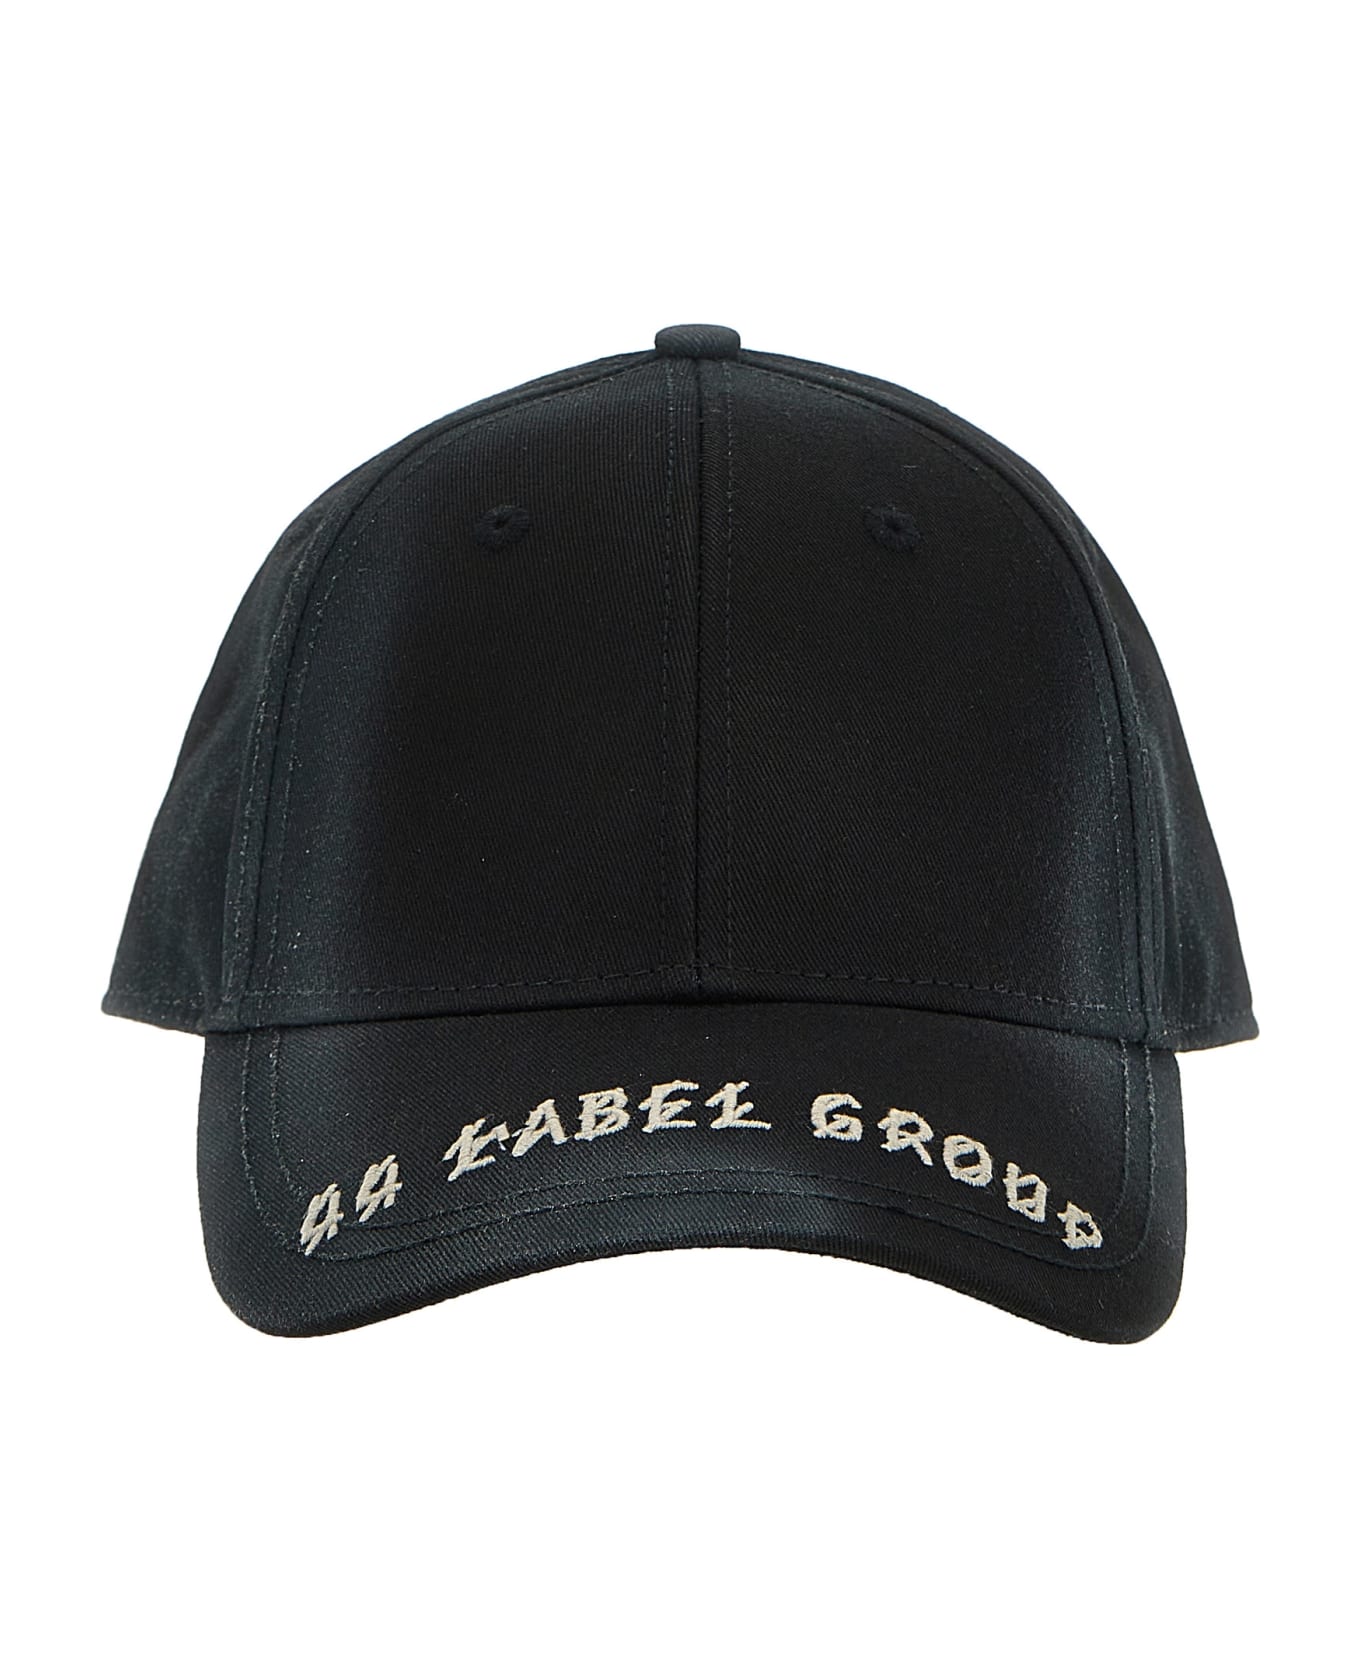 44 Label Group Logo Embroidery Cap - Black  